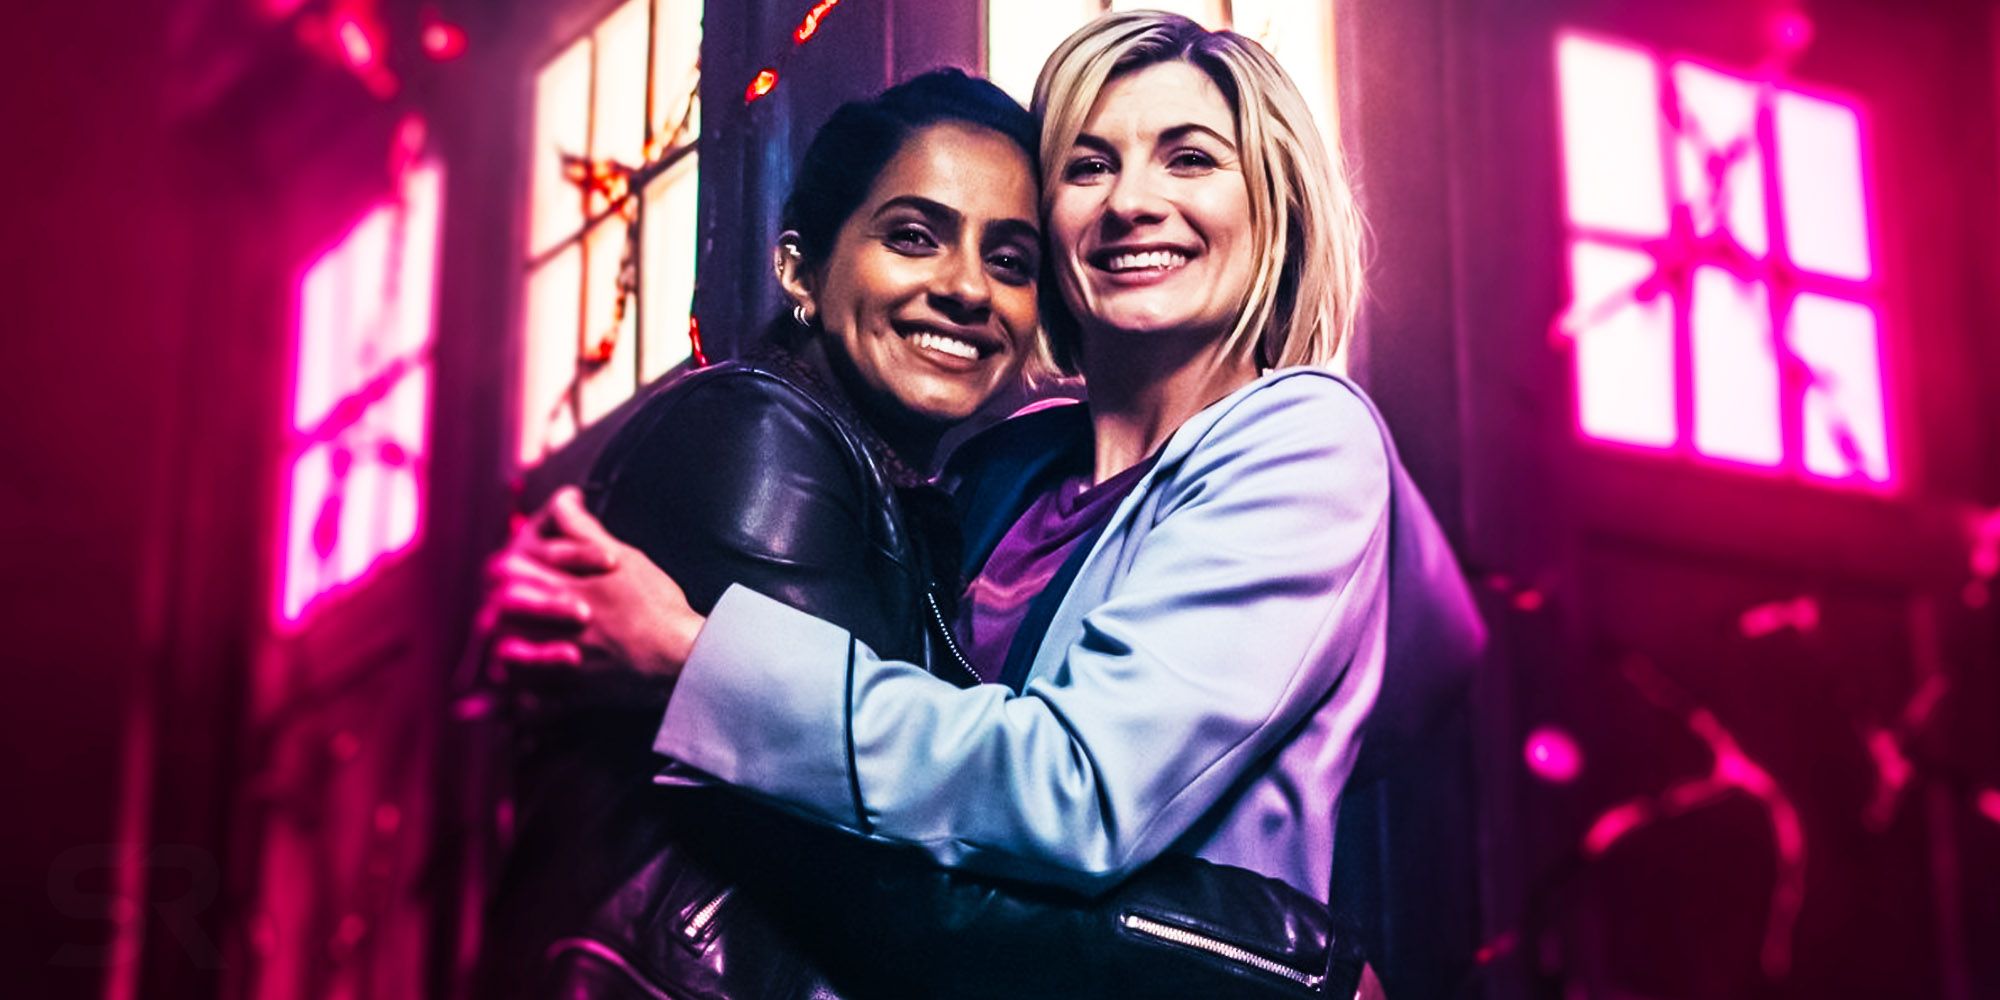 The Thirteenth Doctor Who played by Jodie Whittacker and Companion Yaz played by Mandip Gill hug in front of the TARDIS with a purple overlay in Doctor Who.